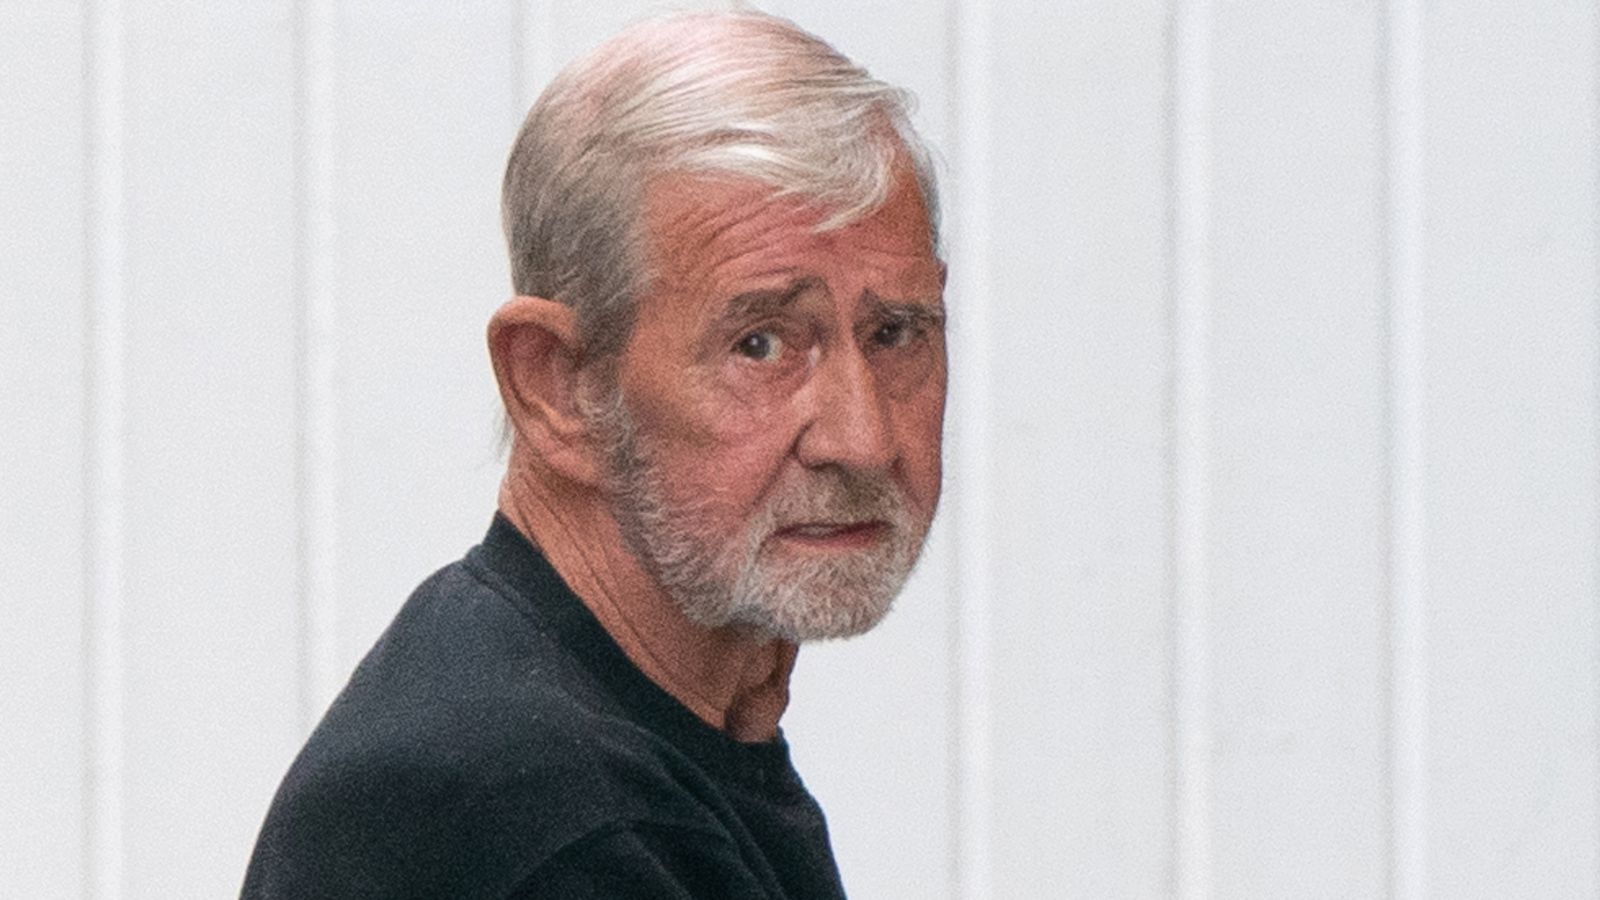 David Hunter trial: Coal miner's confession he killed wife was lawfully obtained, Cyprus court rules